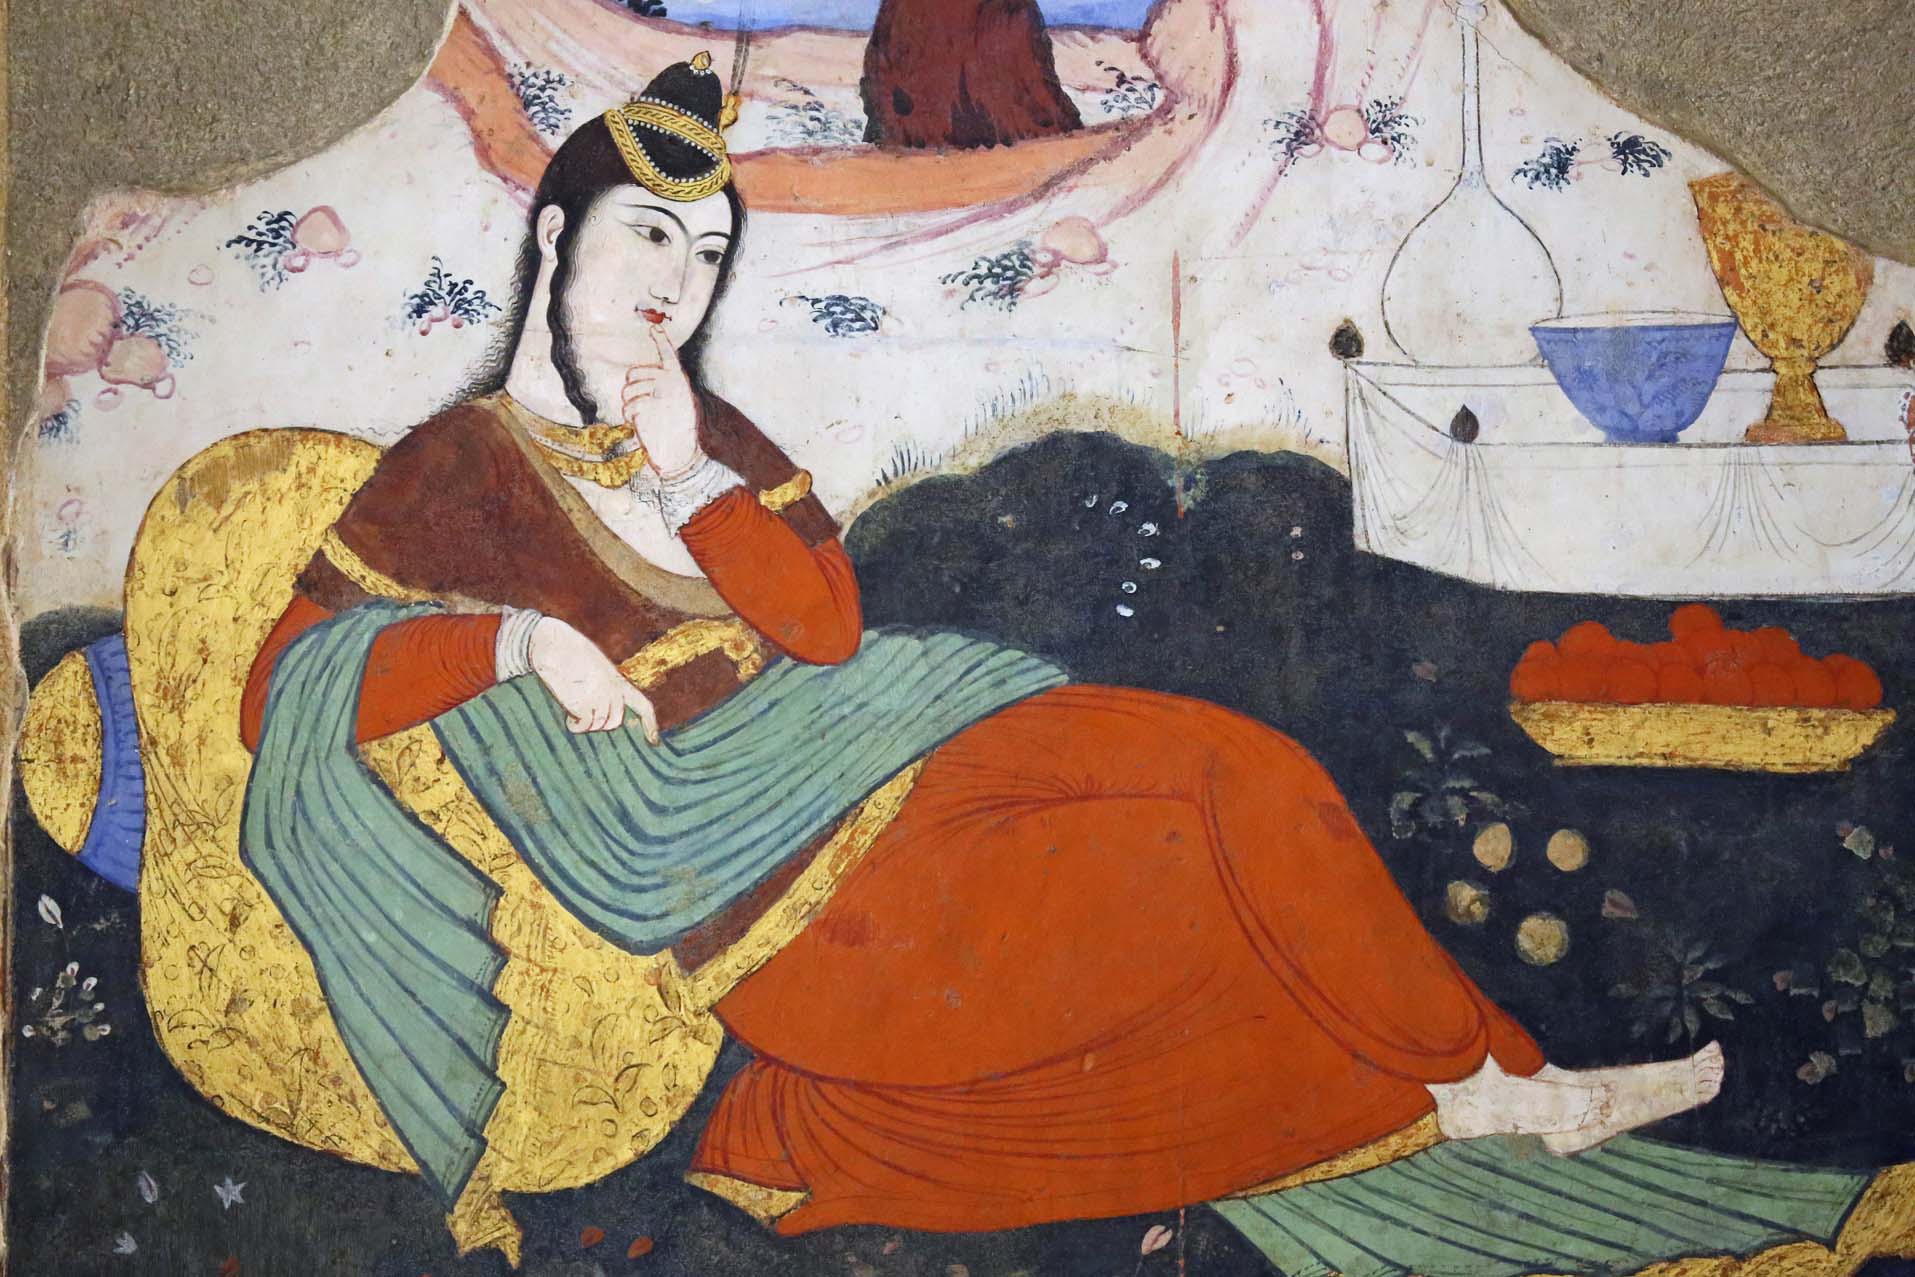 Painting detail from the Chehel Sotun Palace